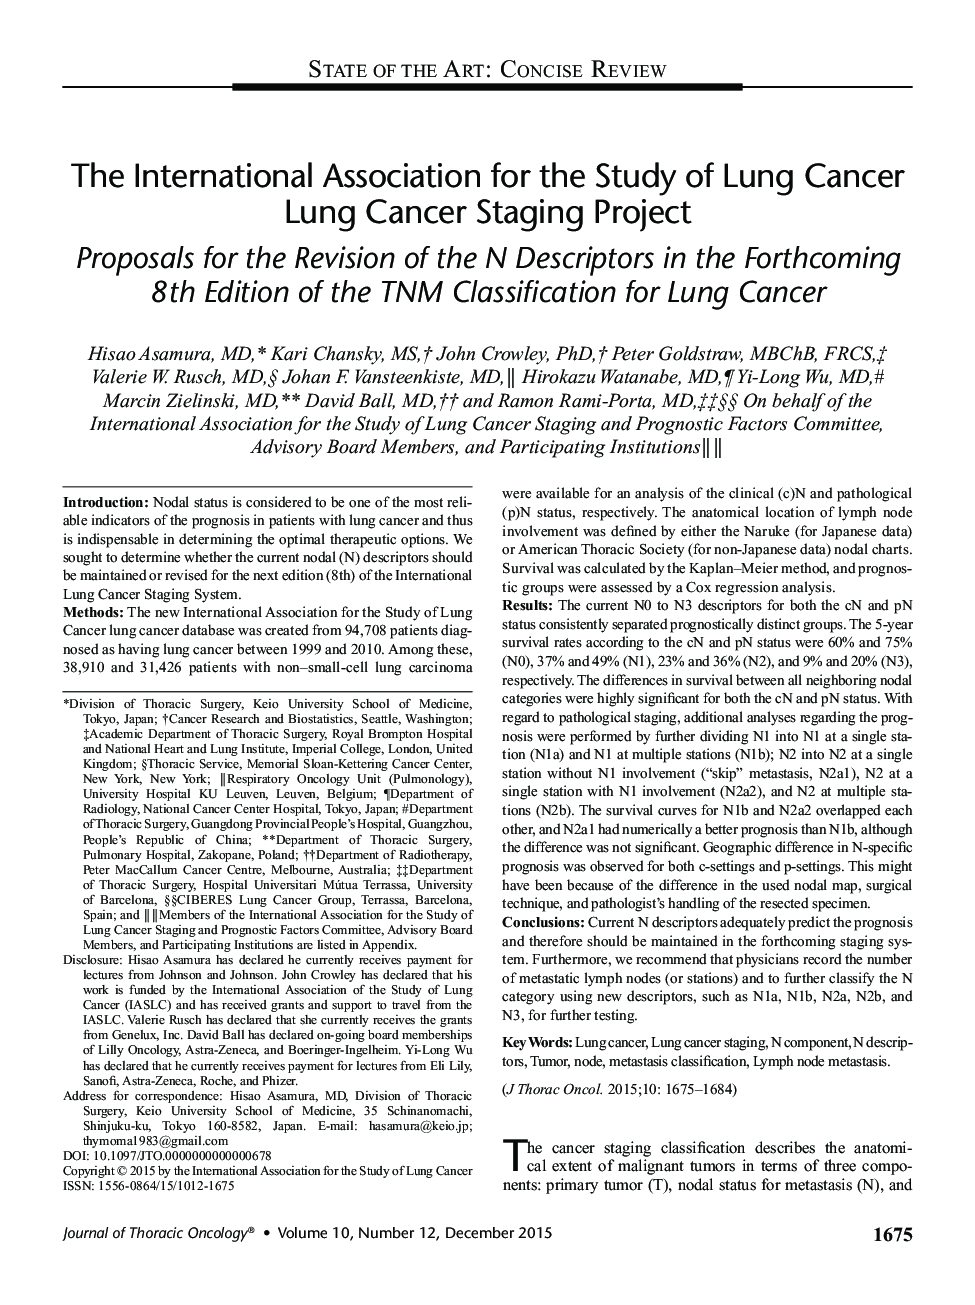 The International Association for the Study of Lung Cancer Lung Cancer Staging Project : Proposals for the Revision of the N Descriptors in the Forthcoming 8th Edition of the TNM Classification for Lung Cancer